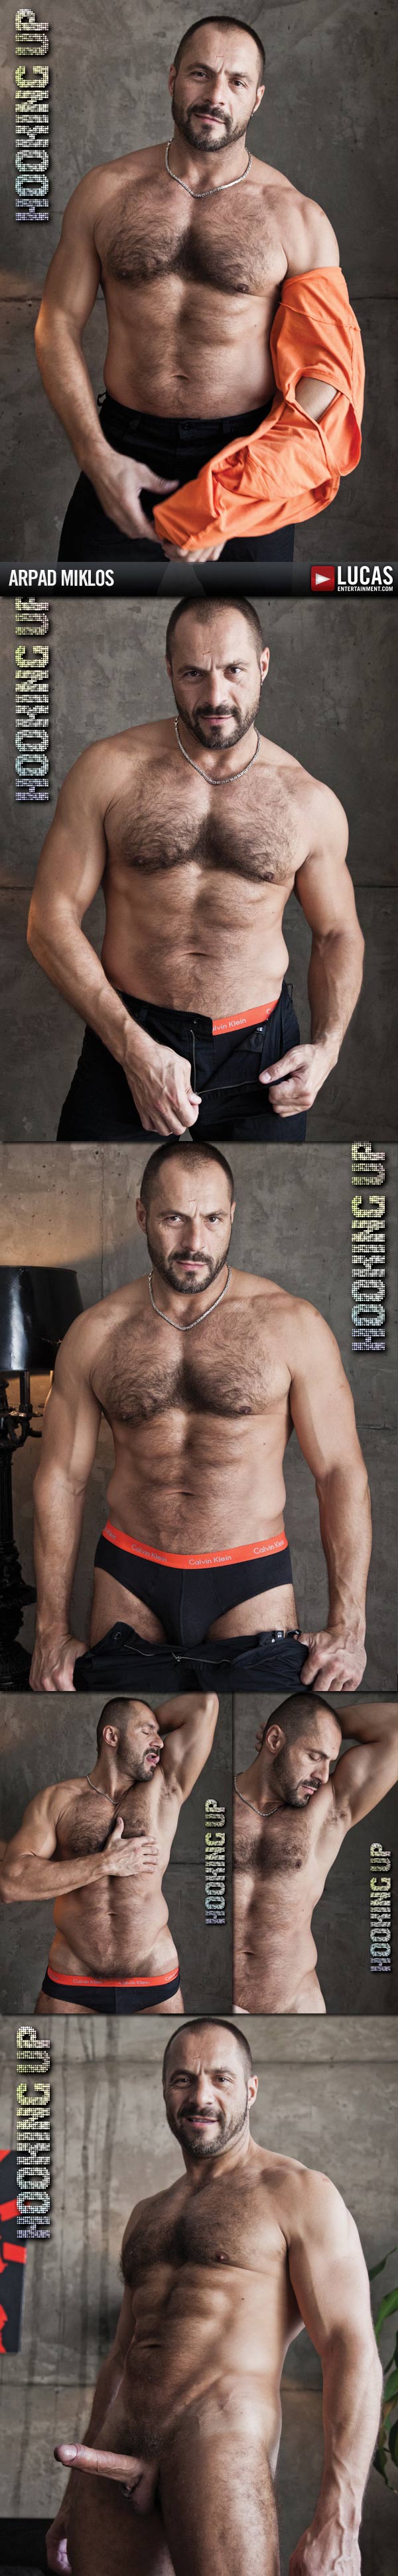 Hooking Up (Arpad Miklos & Justin Cruise) at LucasEntertainment.com